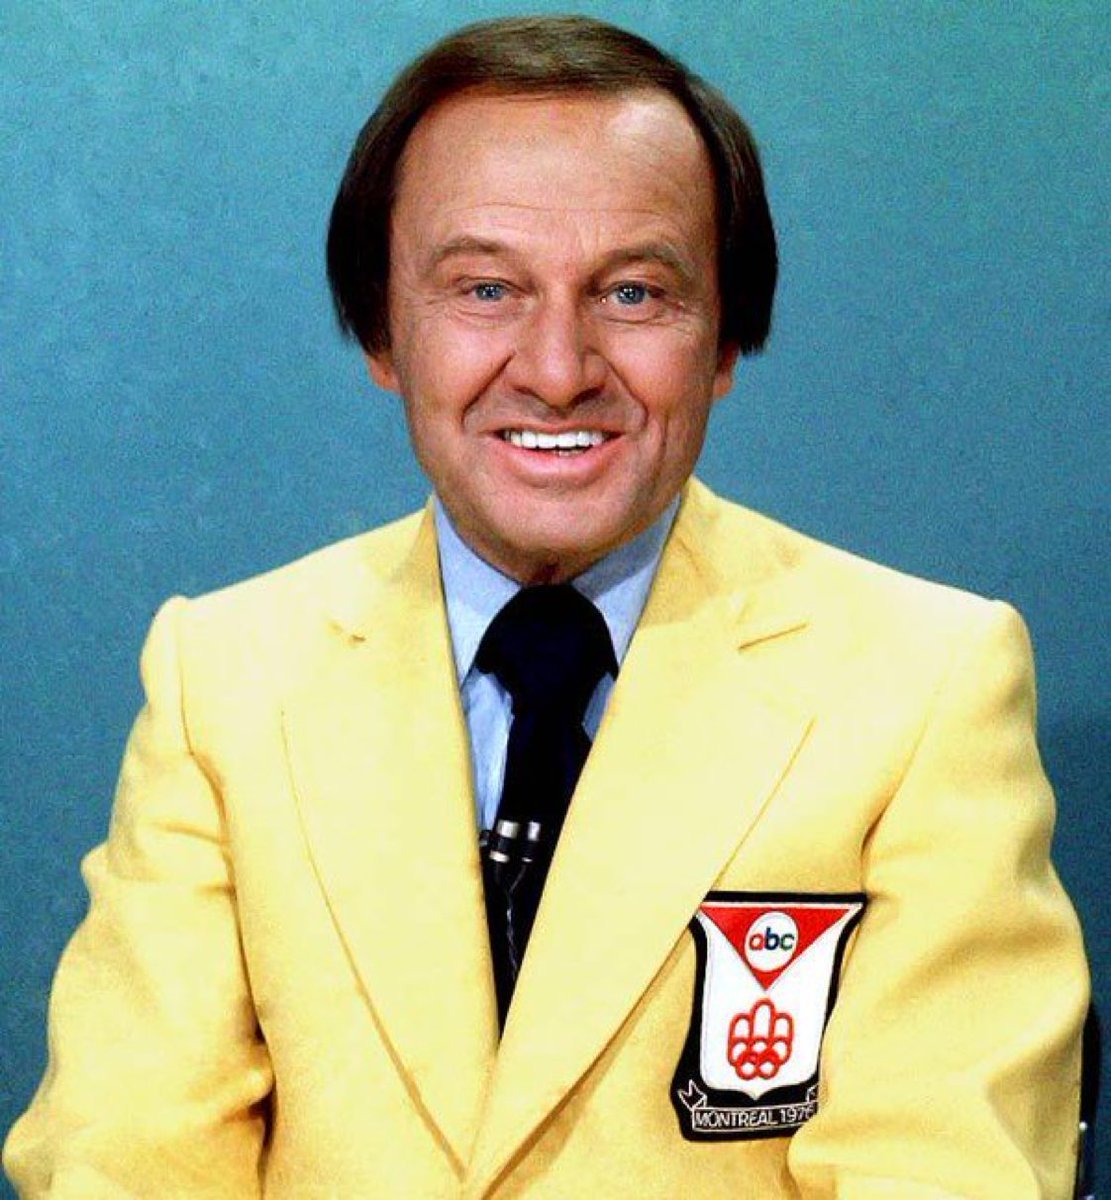 Remembering sportscaster and sportswriter Jim McKay, who was born #OTD (September 24th) in 1921.  #TheVerdictisYours #WideWorldofSports #Olympics #KentuckyDerby #BritishOpen #Indianapolis500 #MarylandMillionDay #FIFAWorldCup